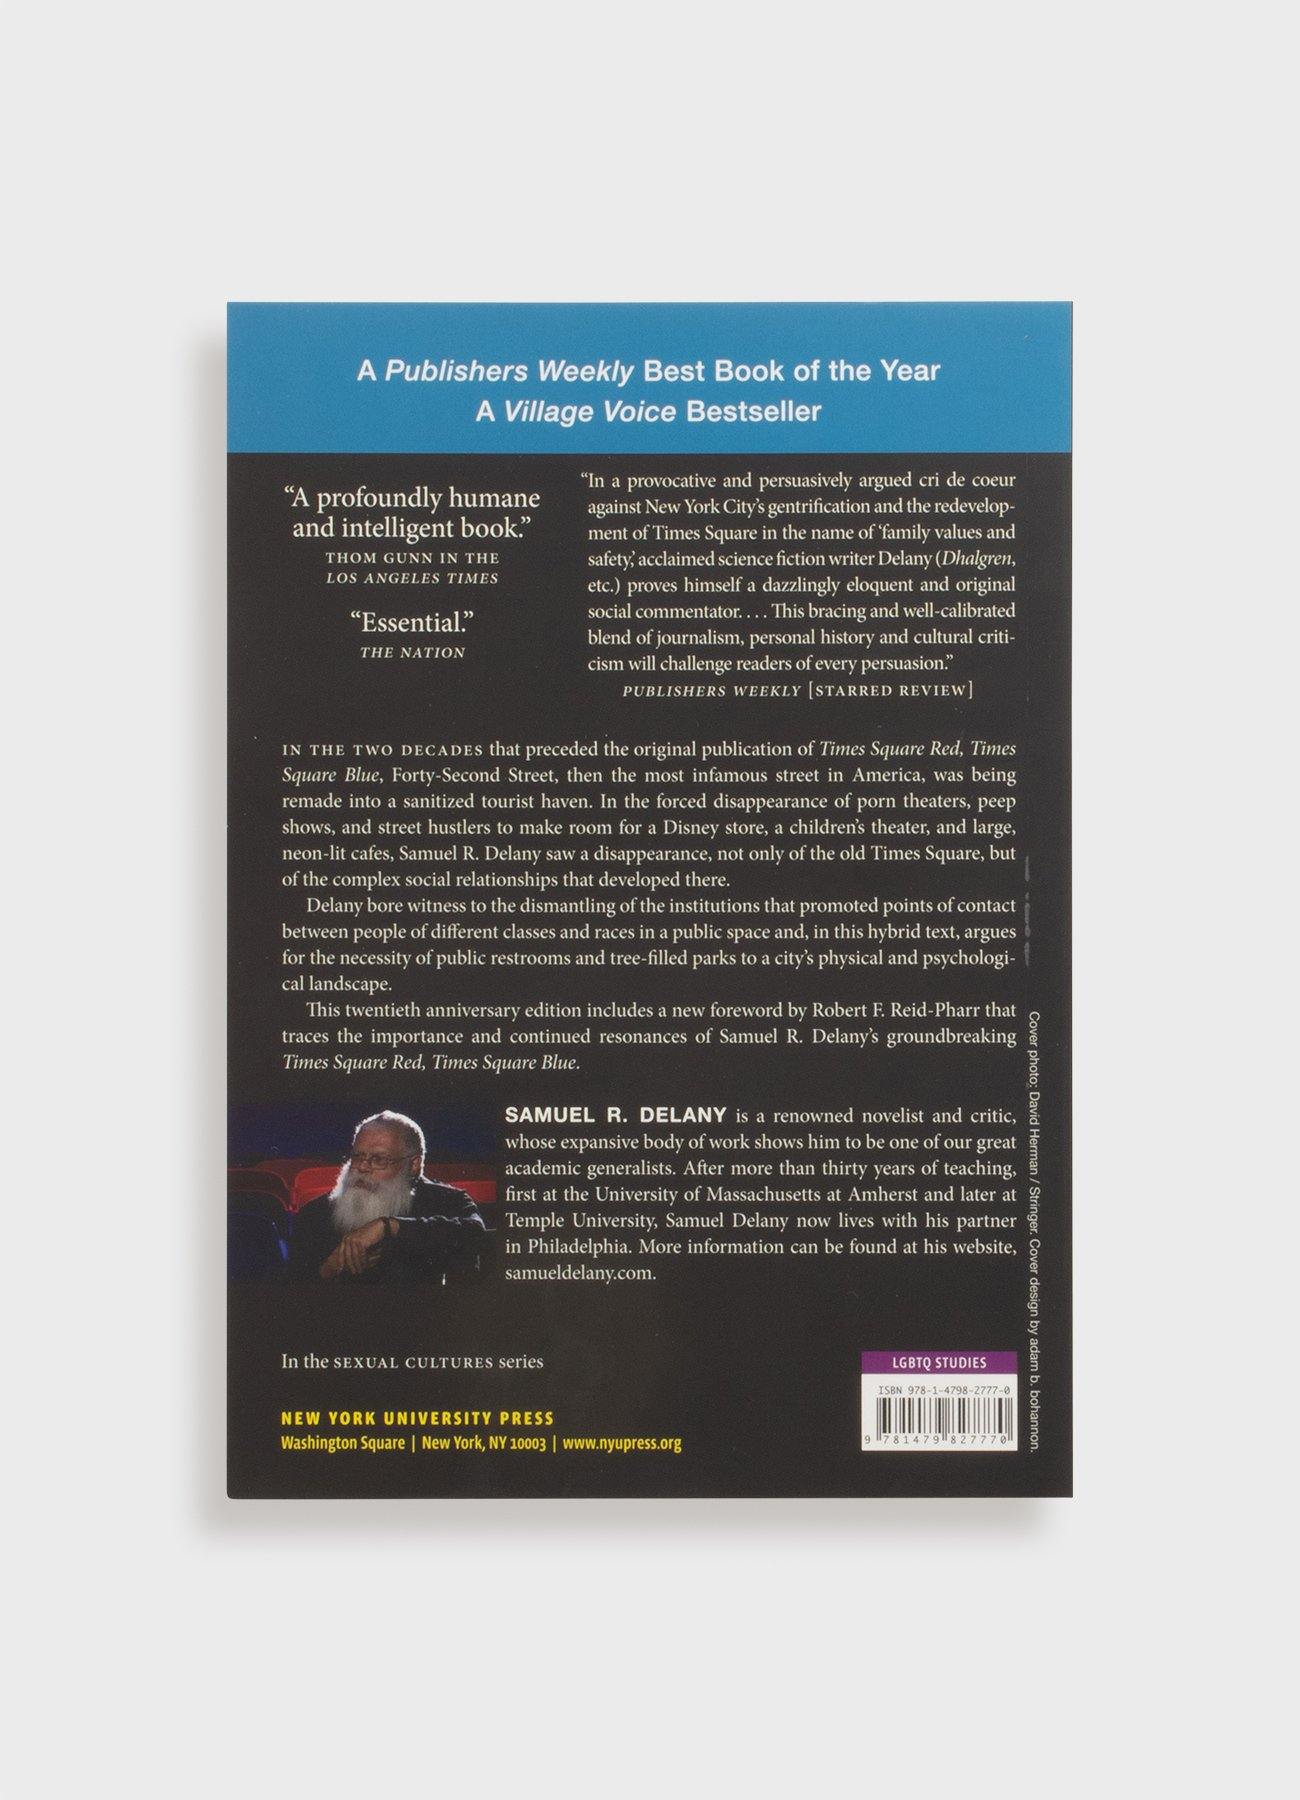 book back cover examples